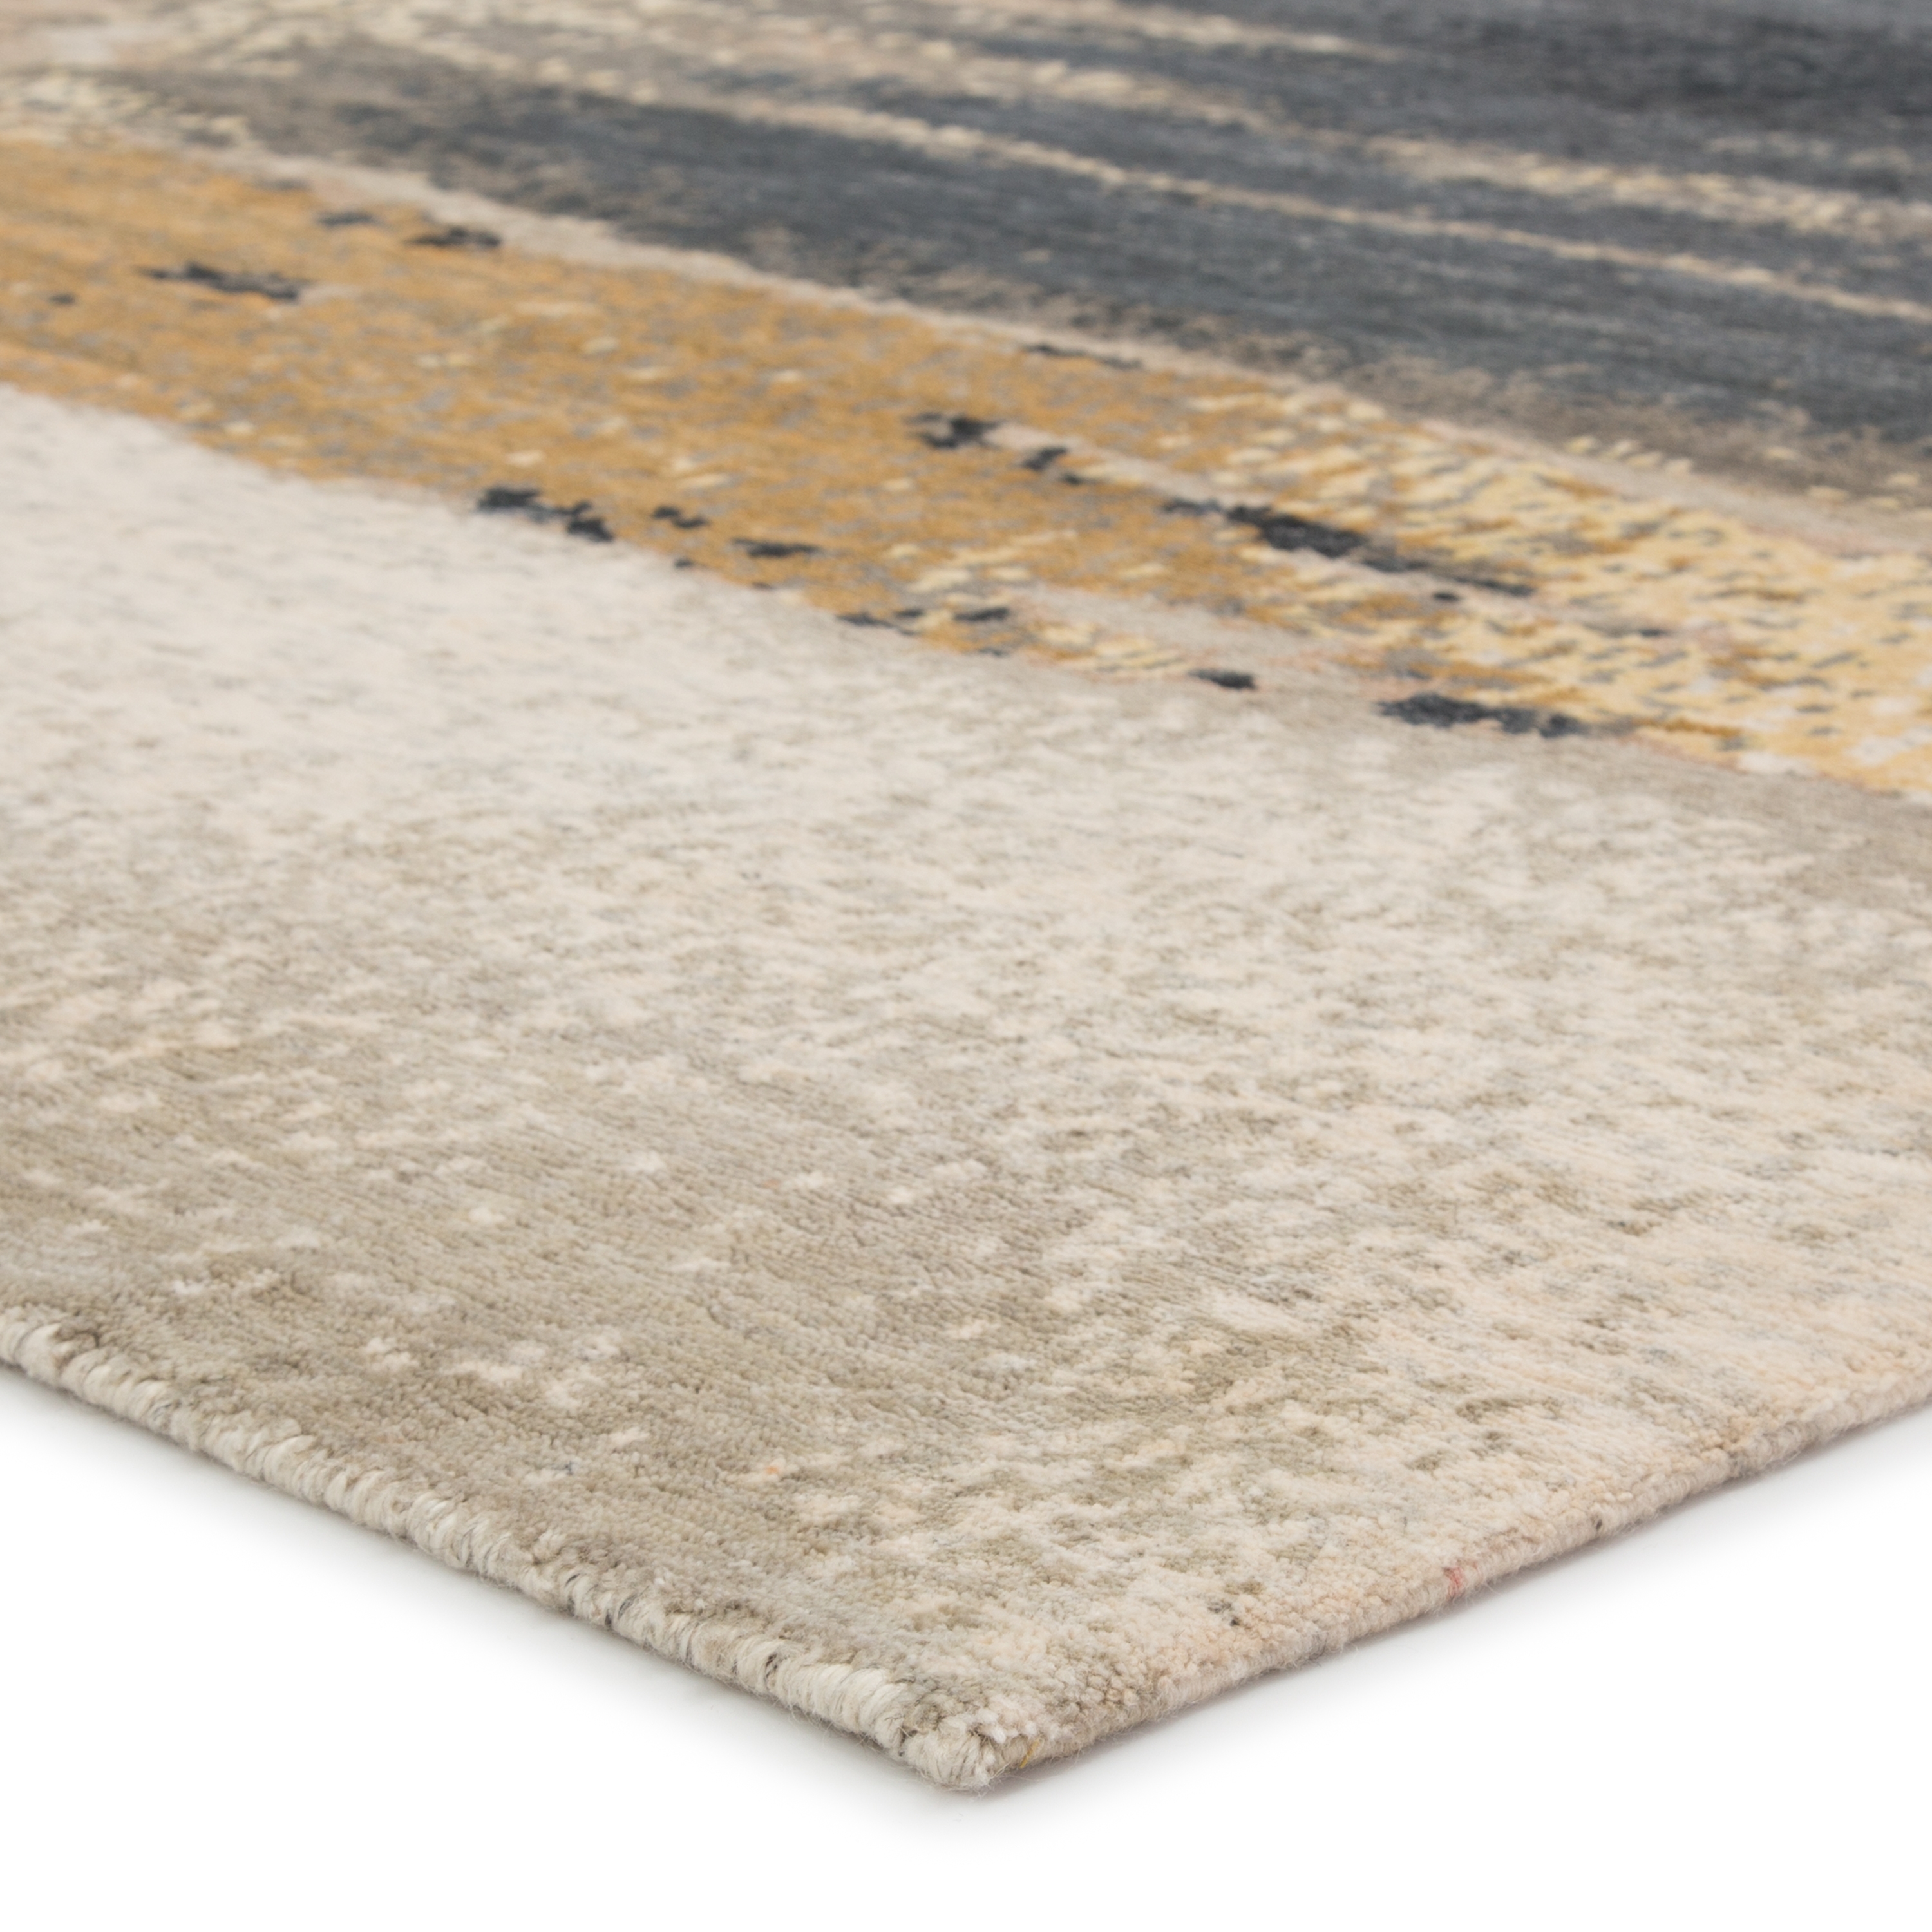 Zoe Bios Creative by Mignonne Hand-Knotted Abstract Gold/ Gray Area Rug (5'X8') - Image 1